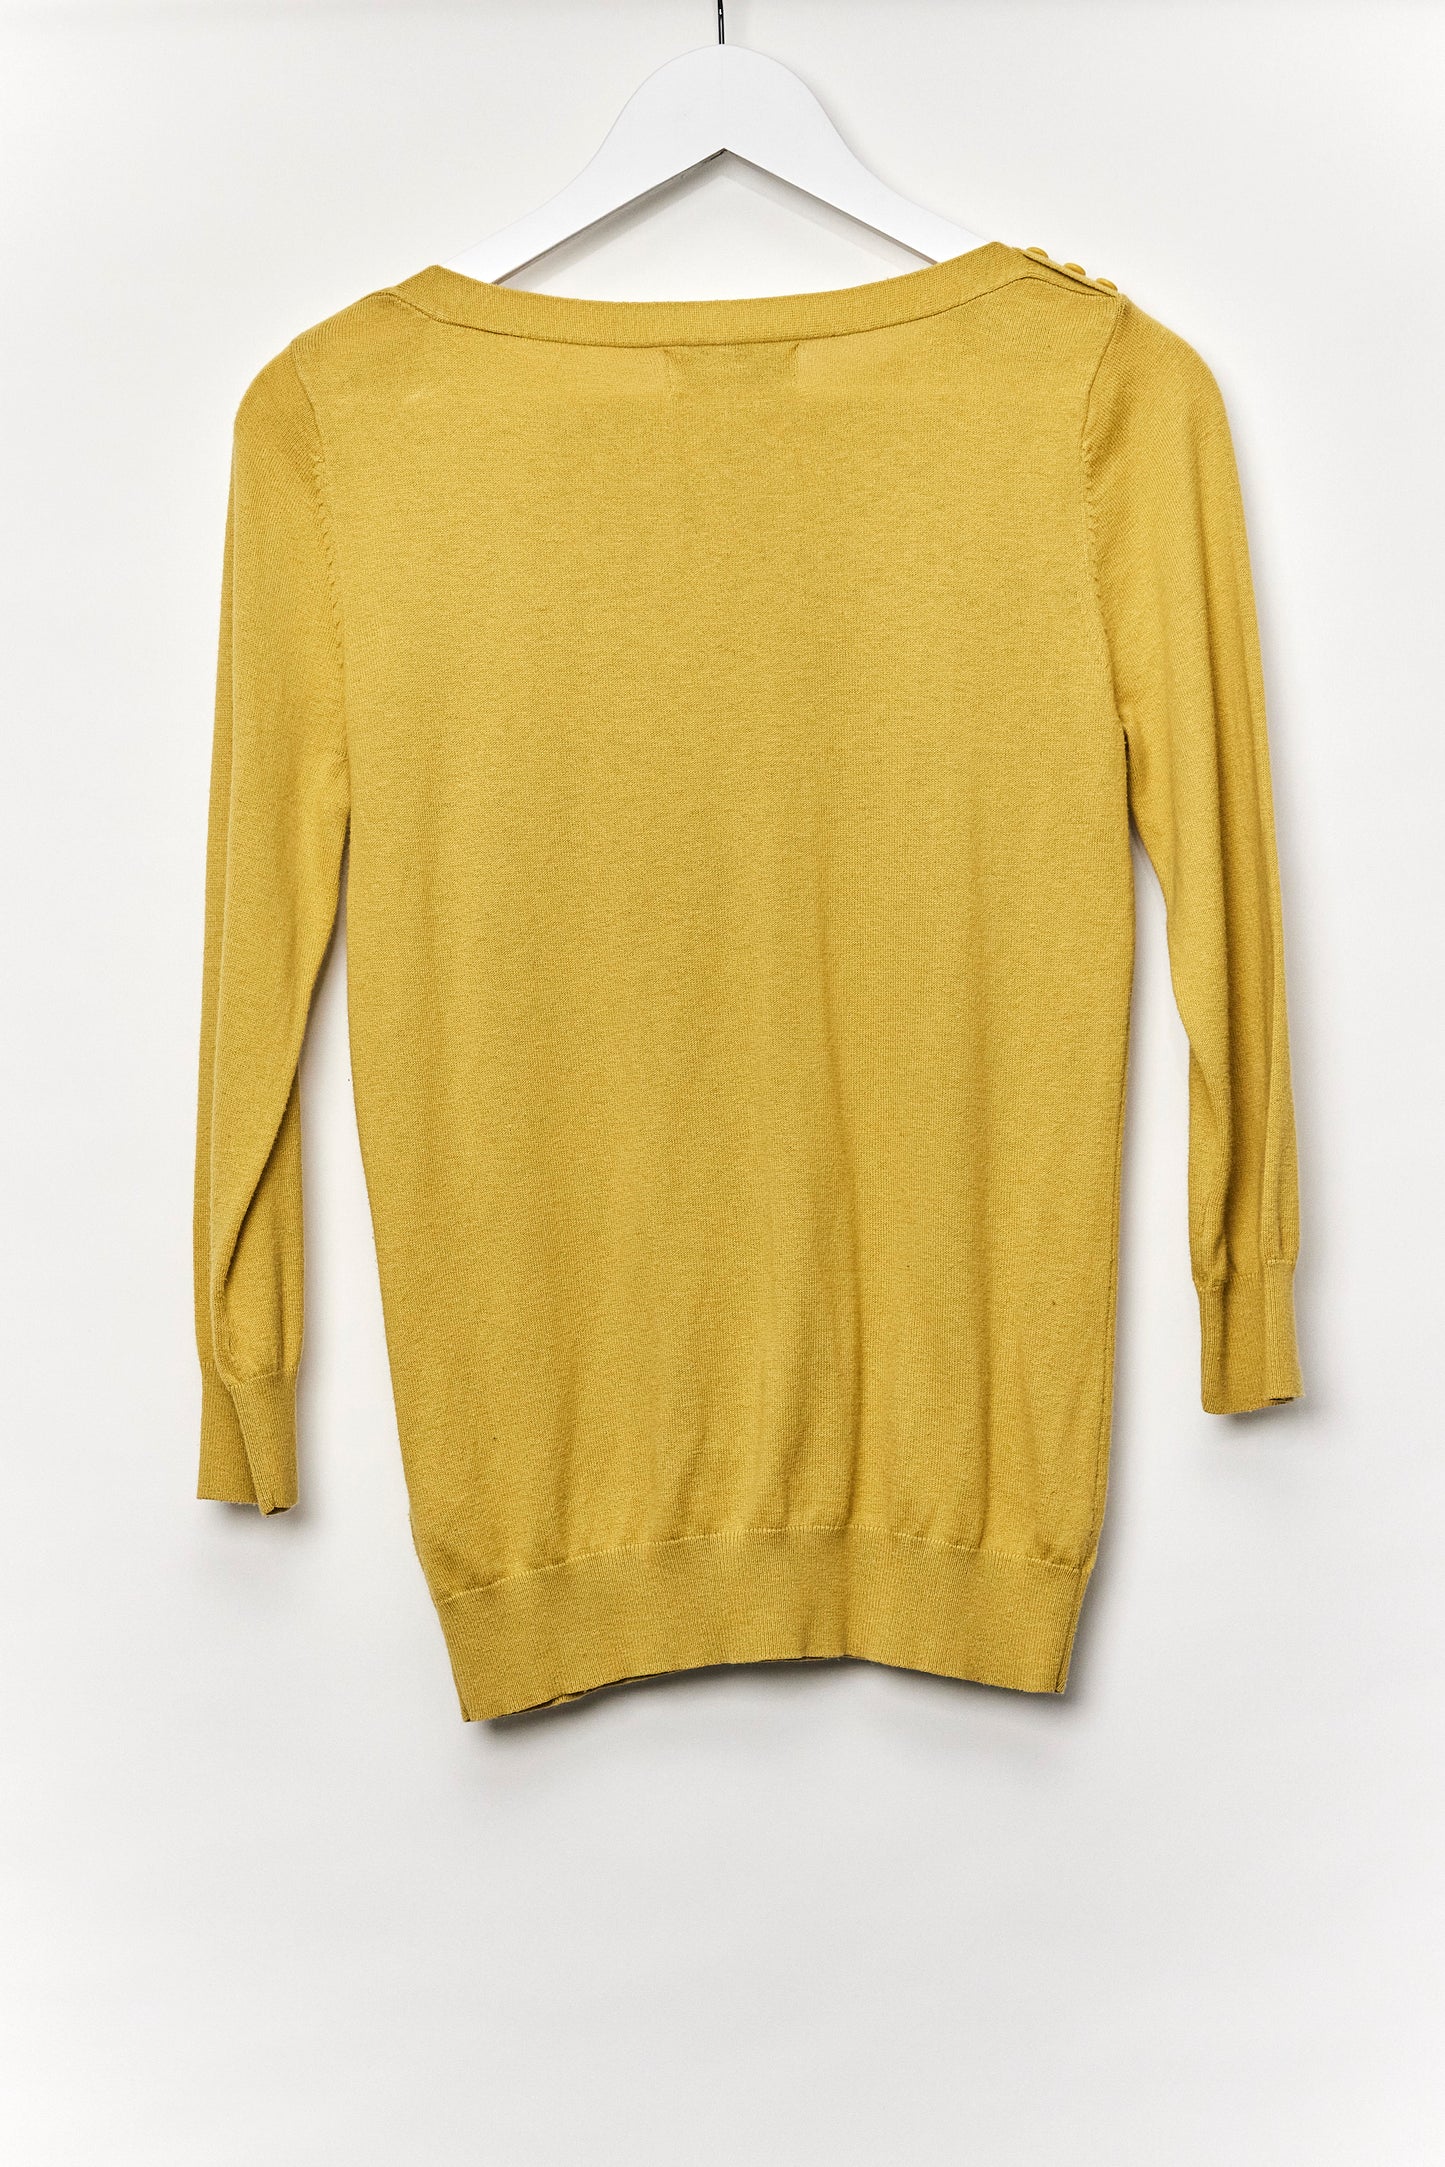 Womens Next Yellow Sweater with 3/4 Sleeve size Small